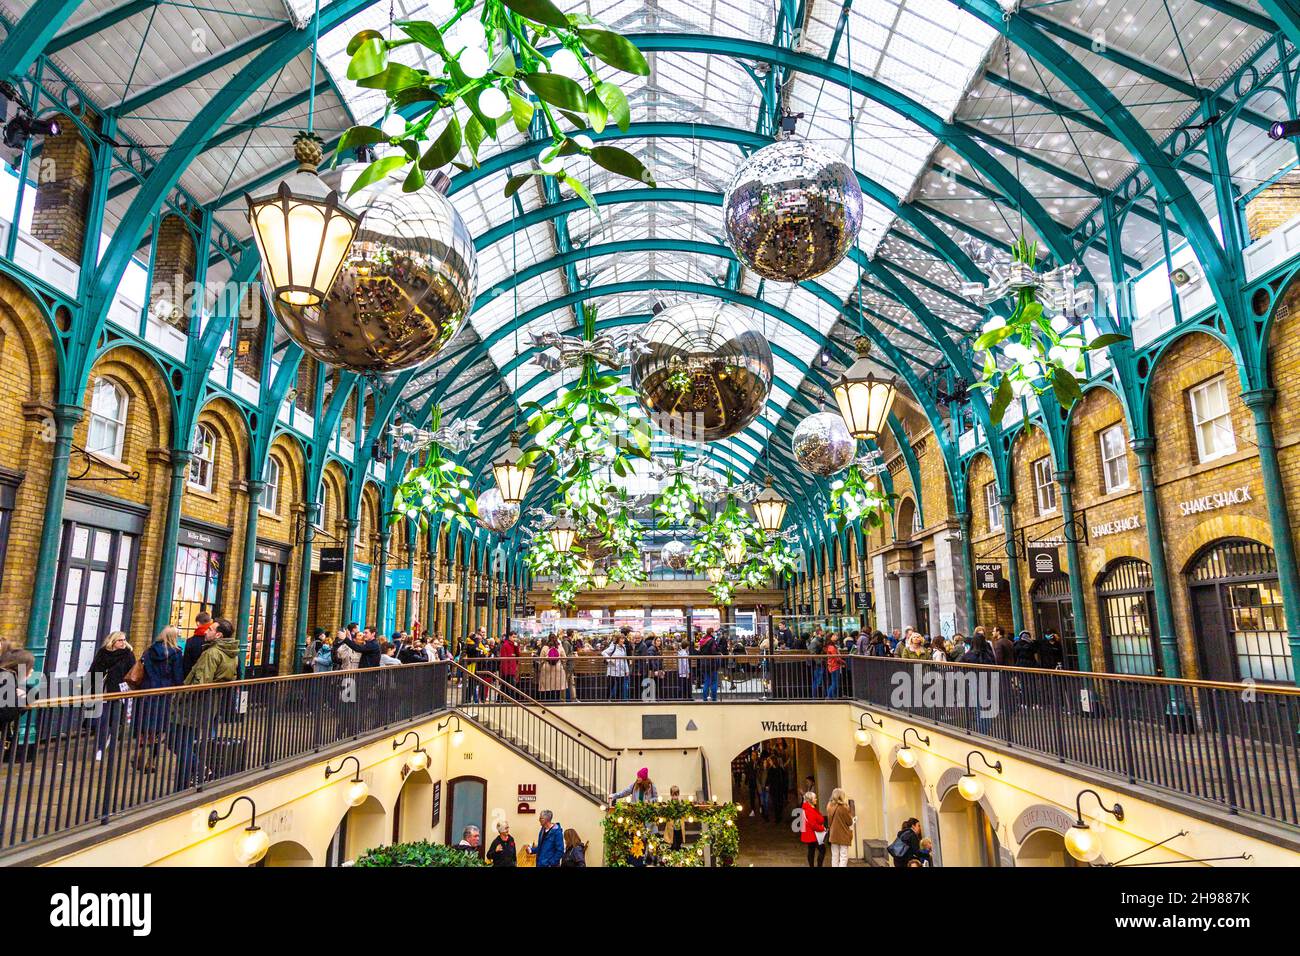 Covent Garden Market decorated for the Christmas season, London, UK Stock Photo